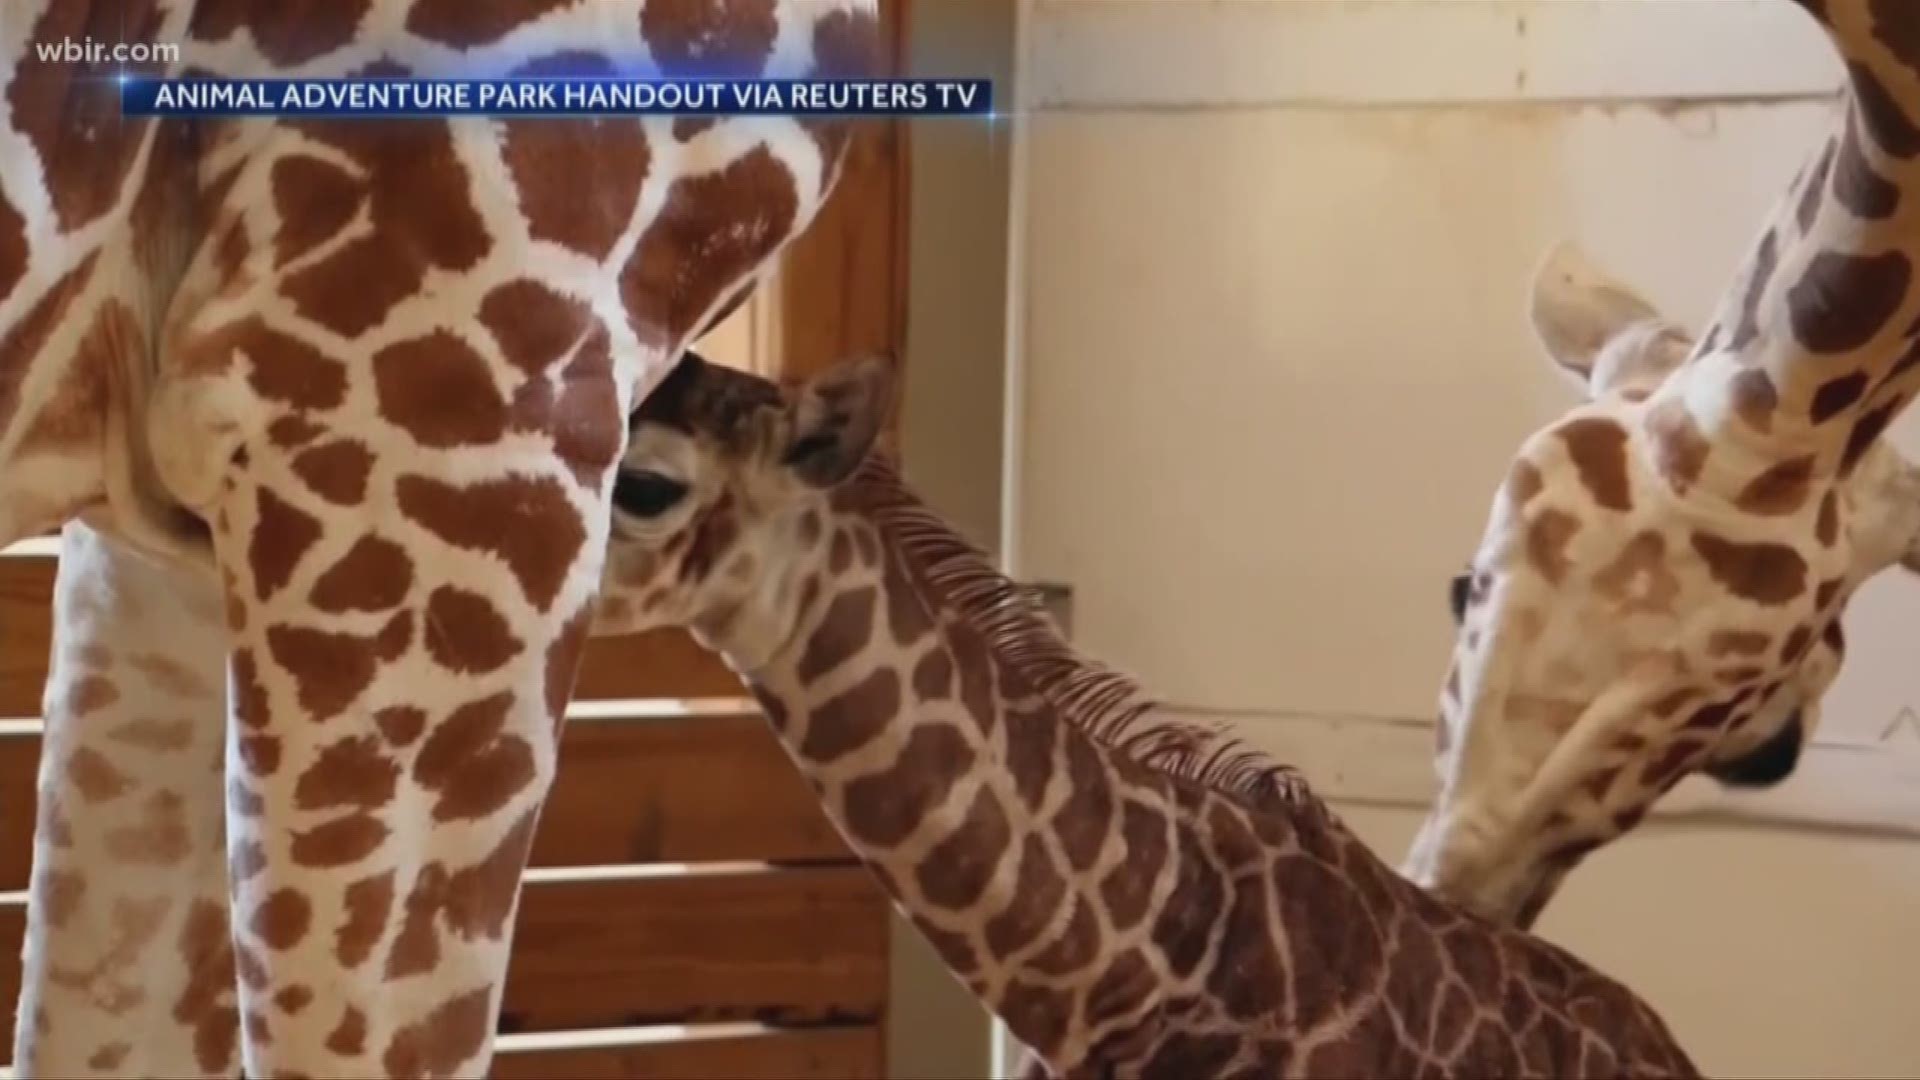 Our livestream of April the giraffe's pregnancy reached millions around the world. But for two people...it was the birth of a life long friendship.